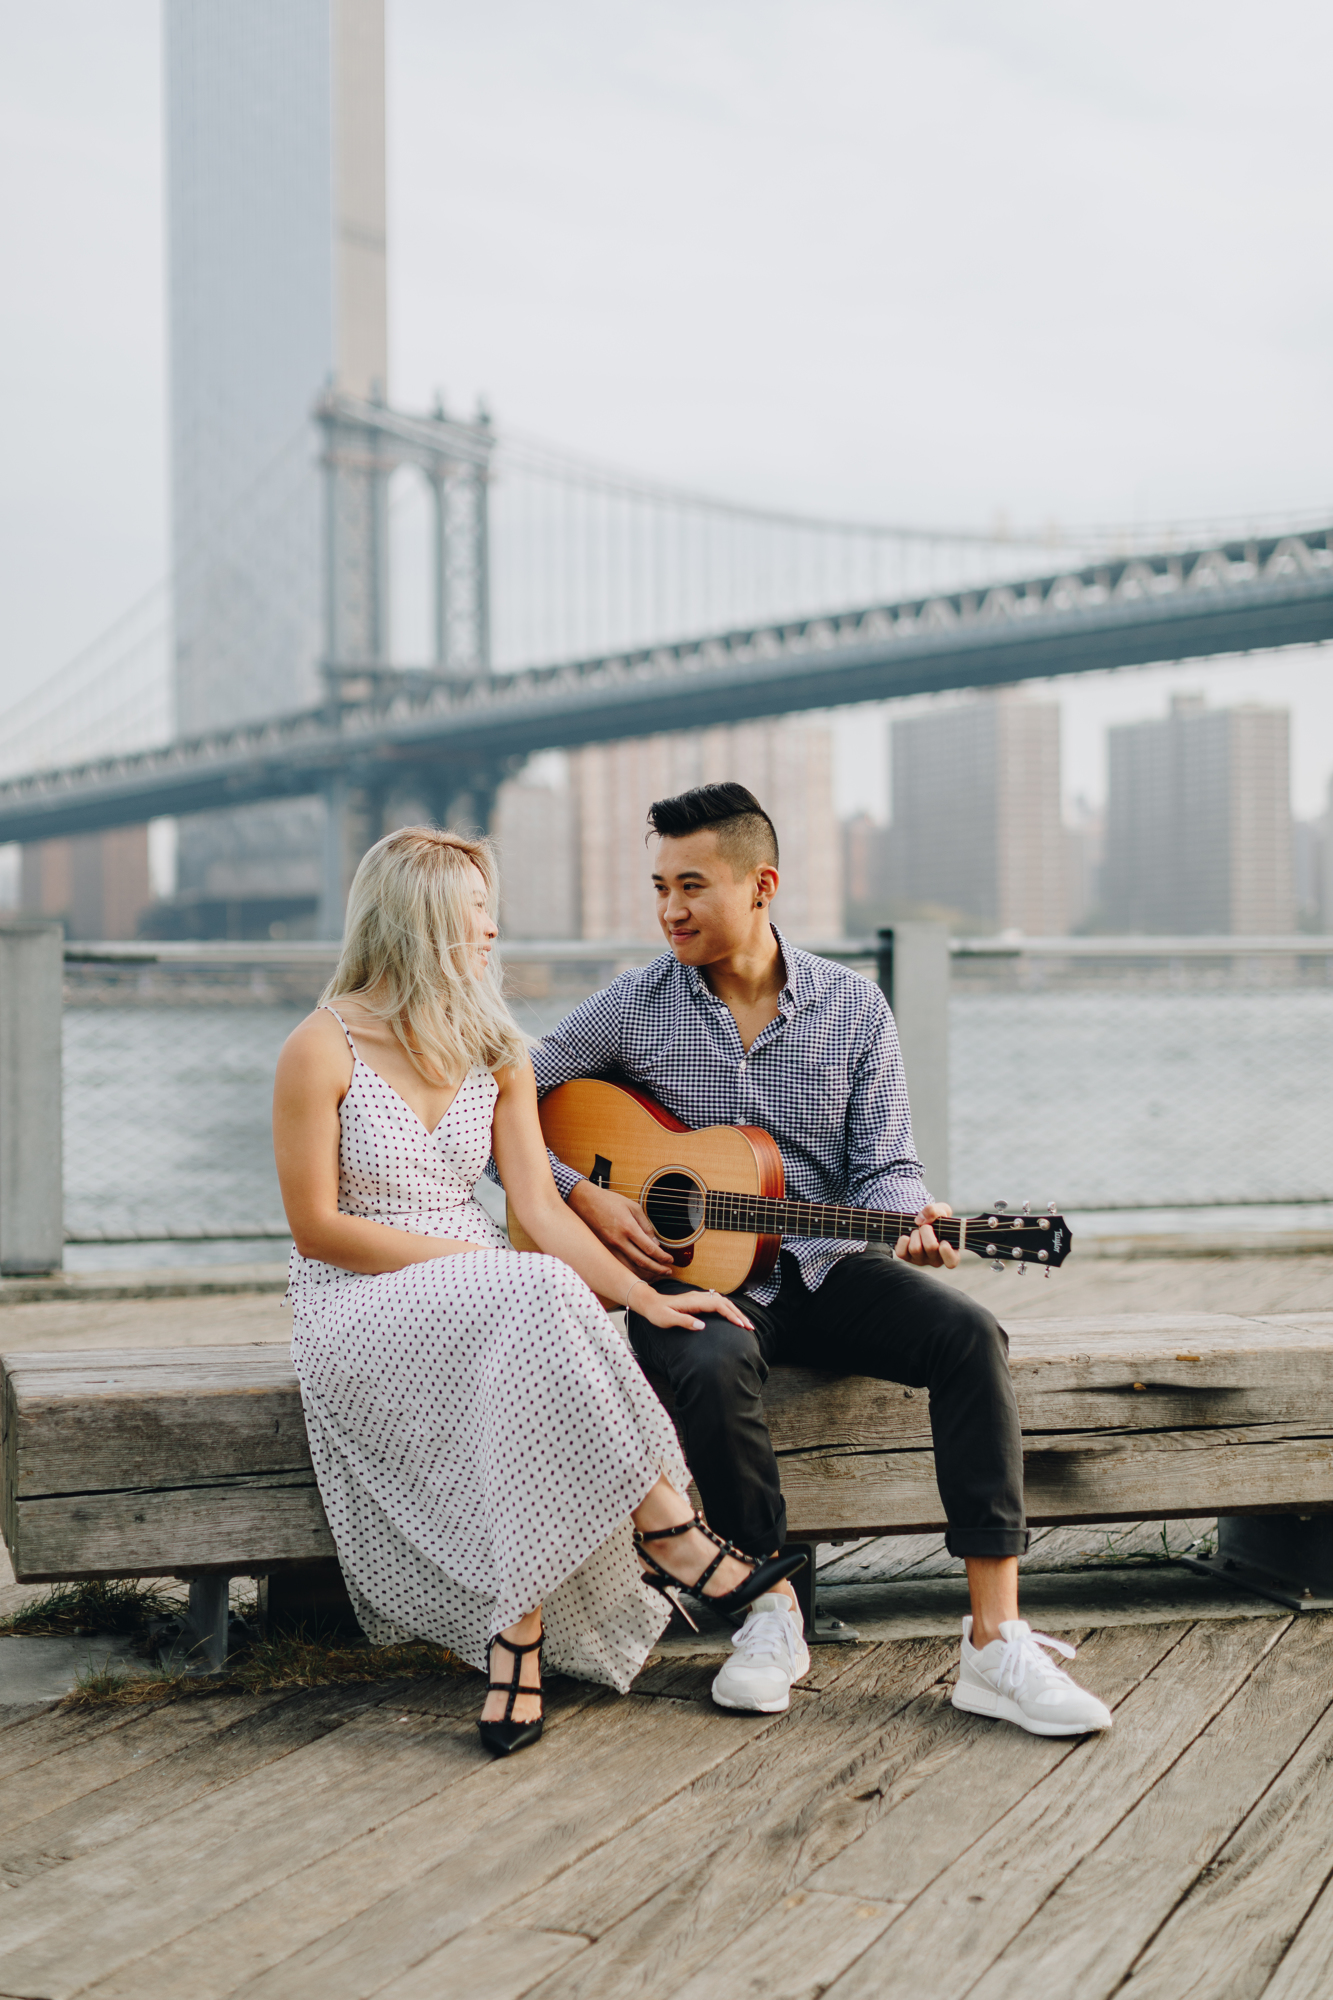 Fairy Tale Fall Engagement Photos in DUMBO